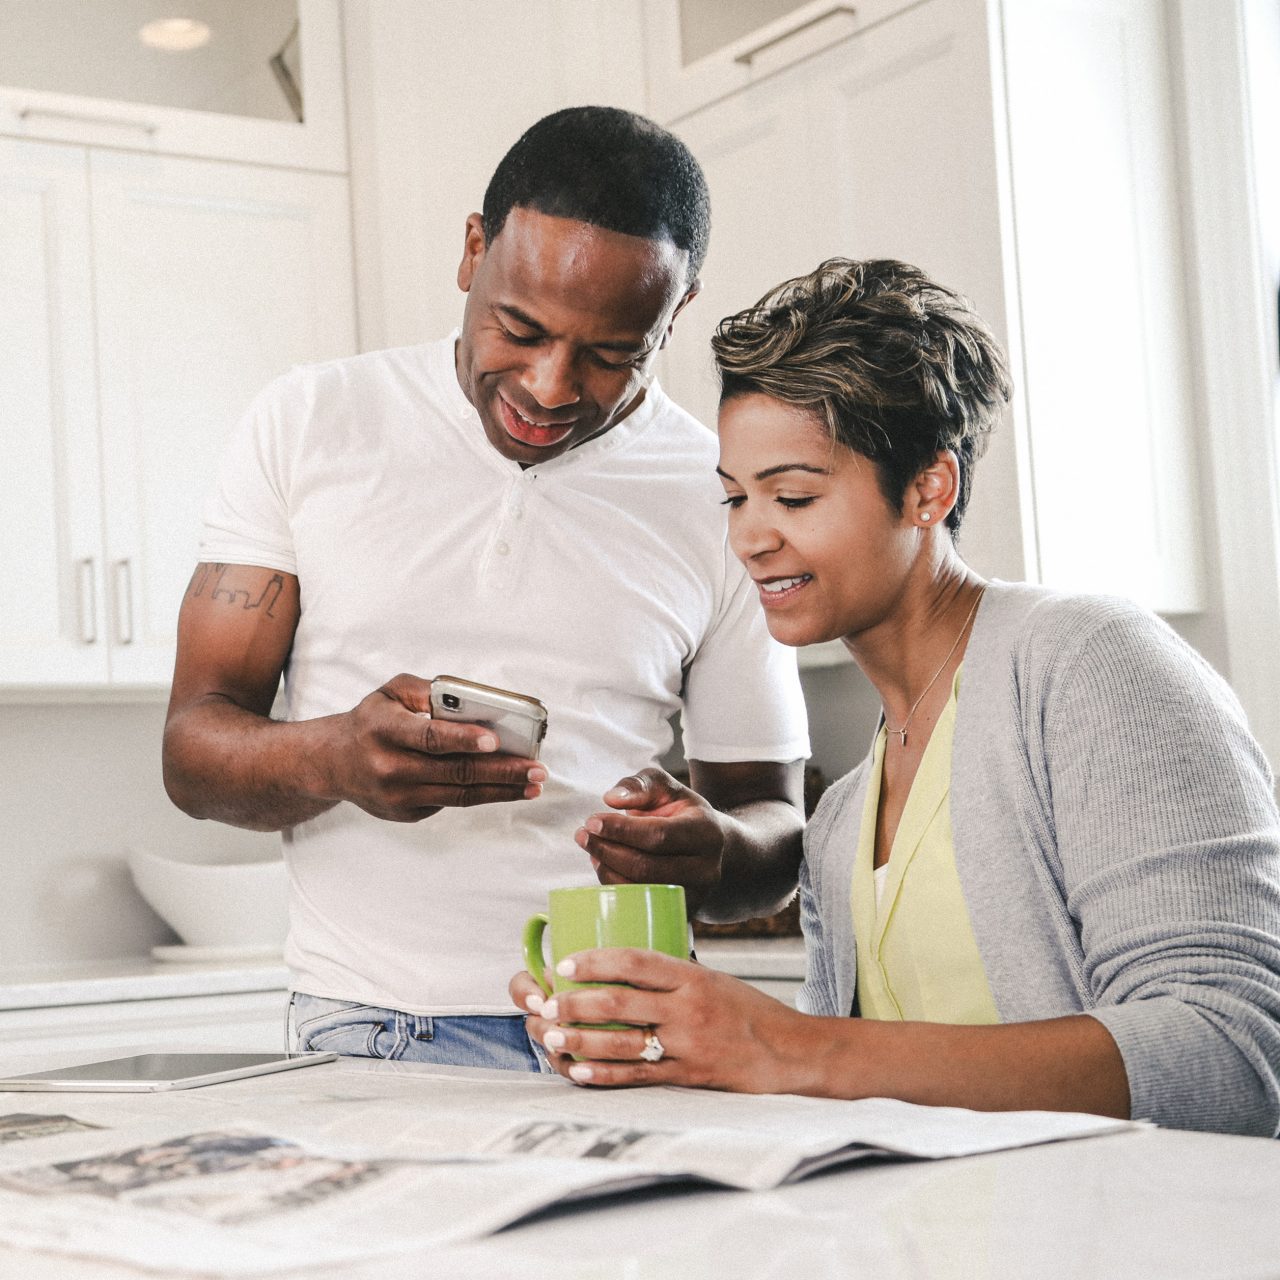 Couple looking at devices and news paper in kitchen drinking coffee